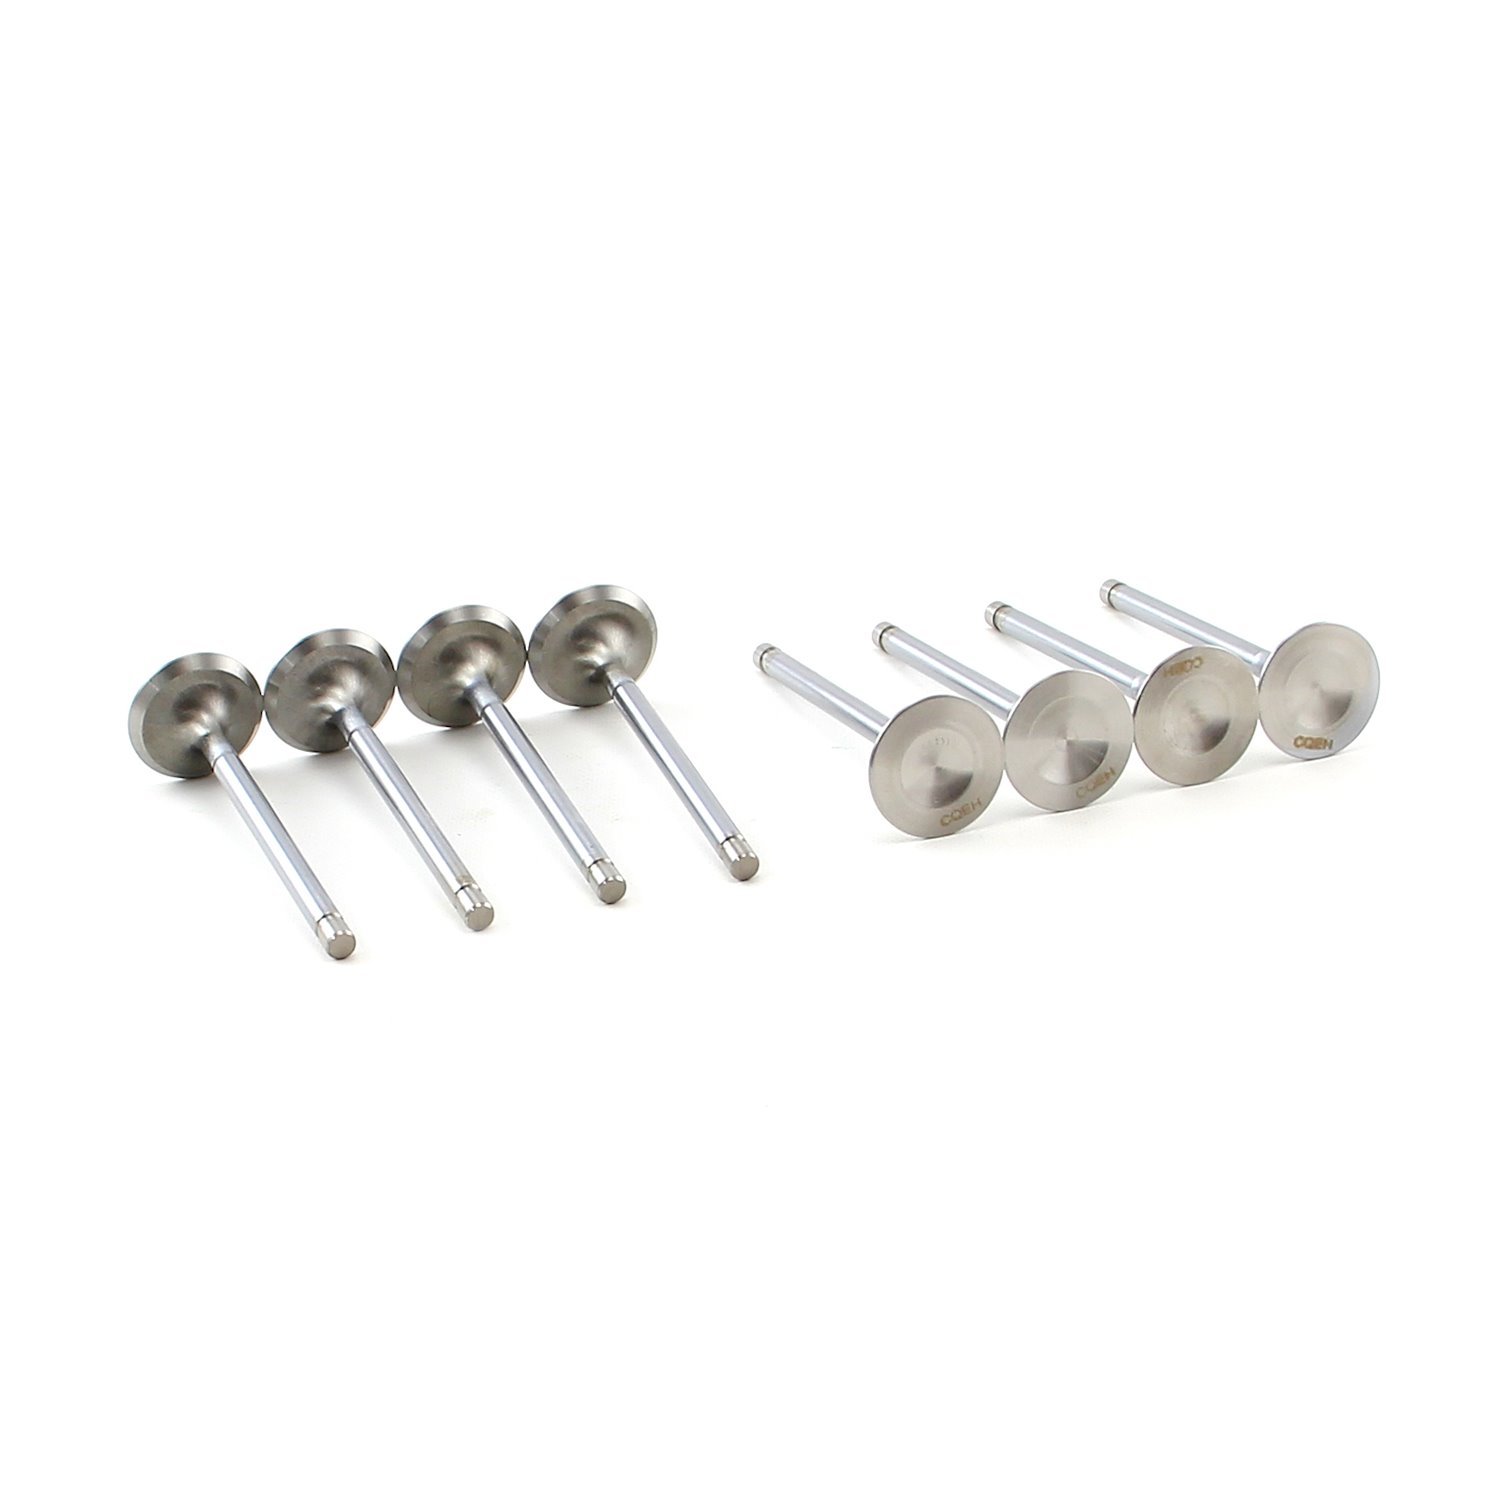 Ford 302 351C Cleveland 460 2250 +STD 11/32 Stainless Steel Exhaust Valves Set